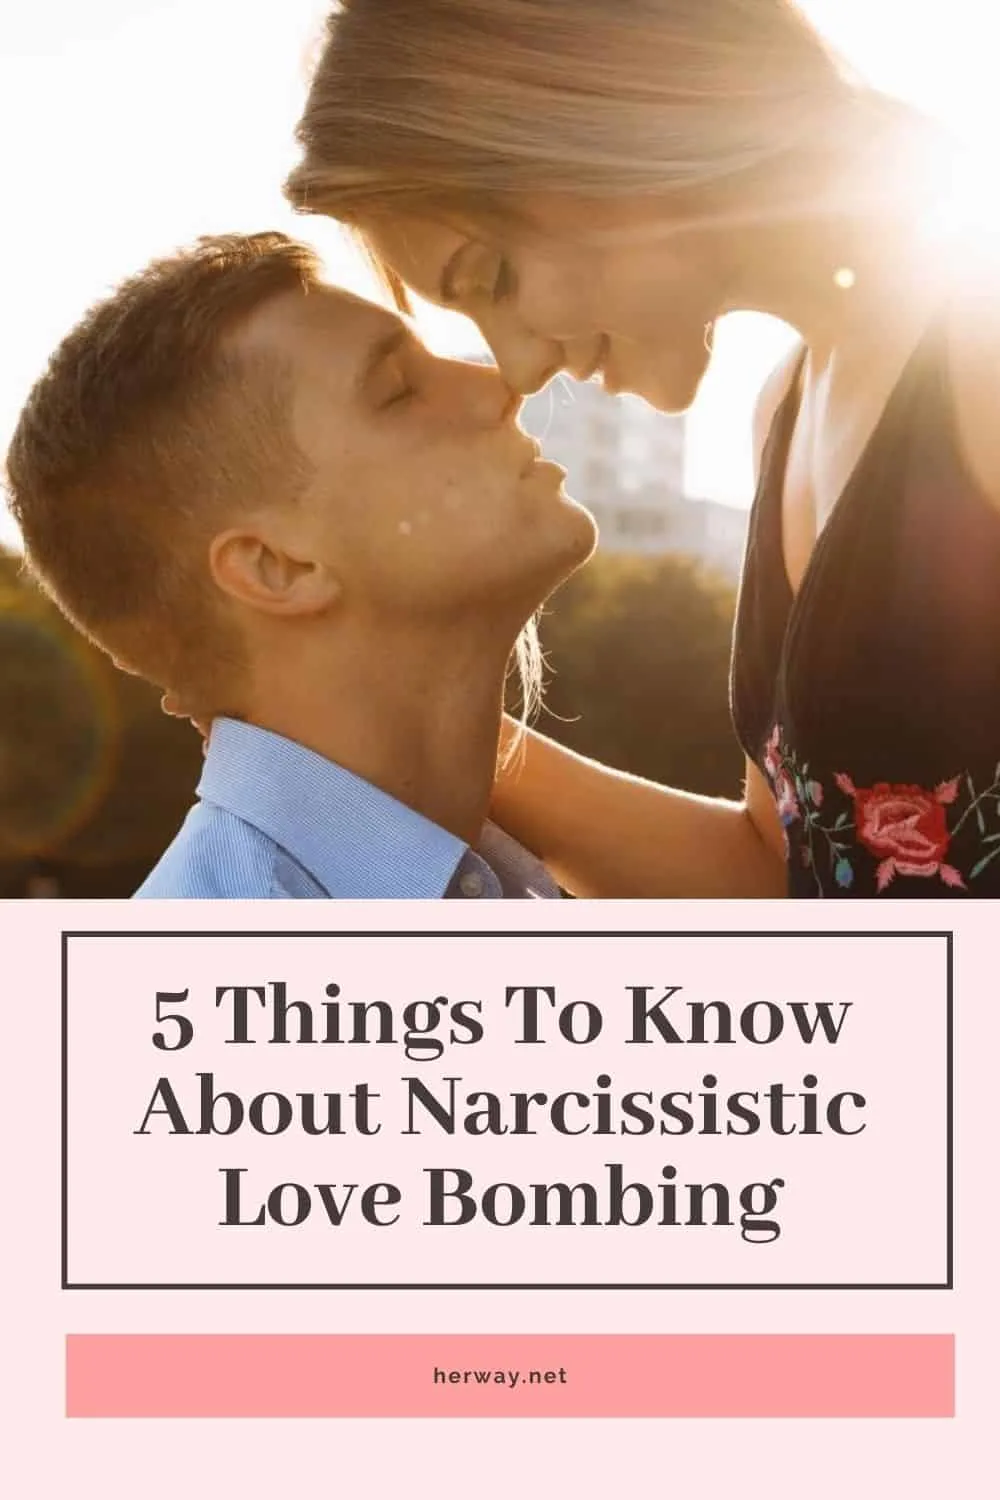 5 Things To Know About Narcissistic Love Bombing